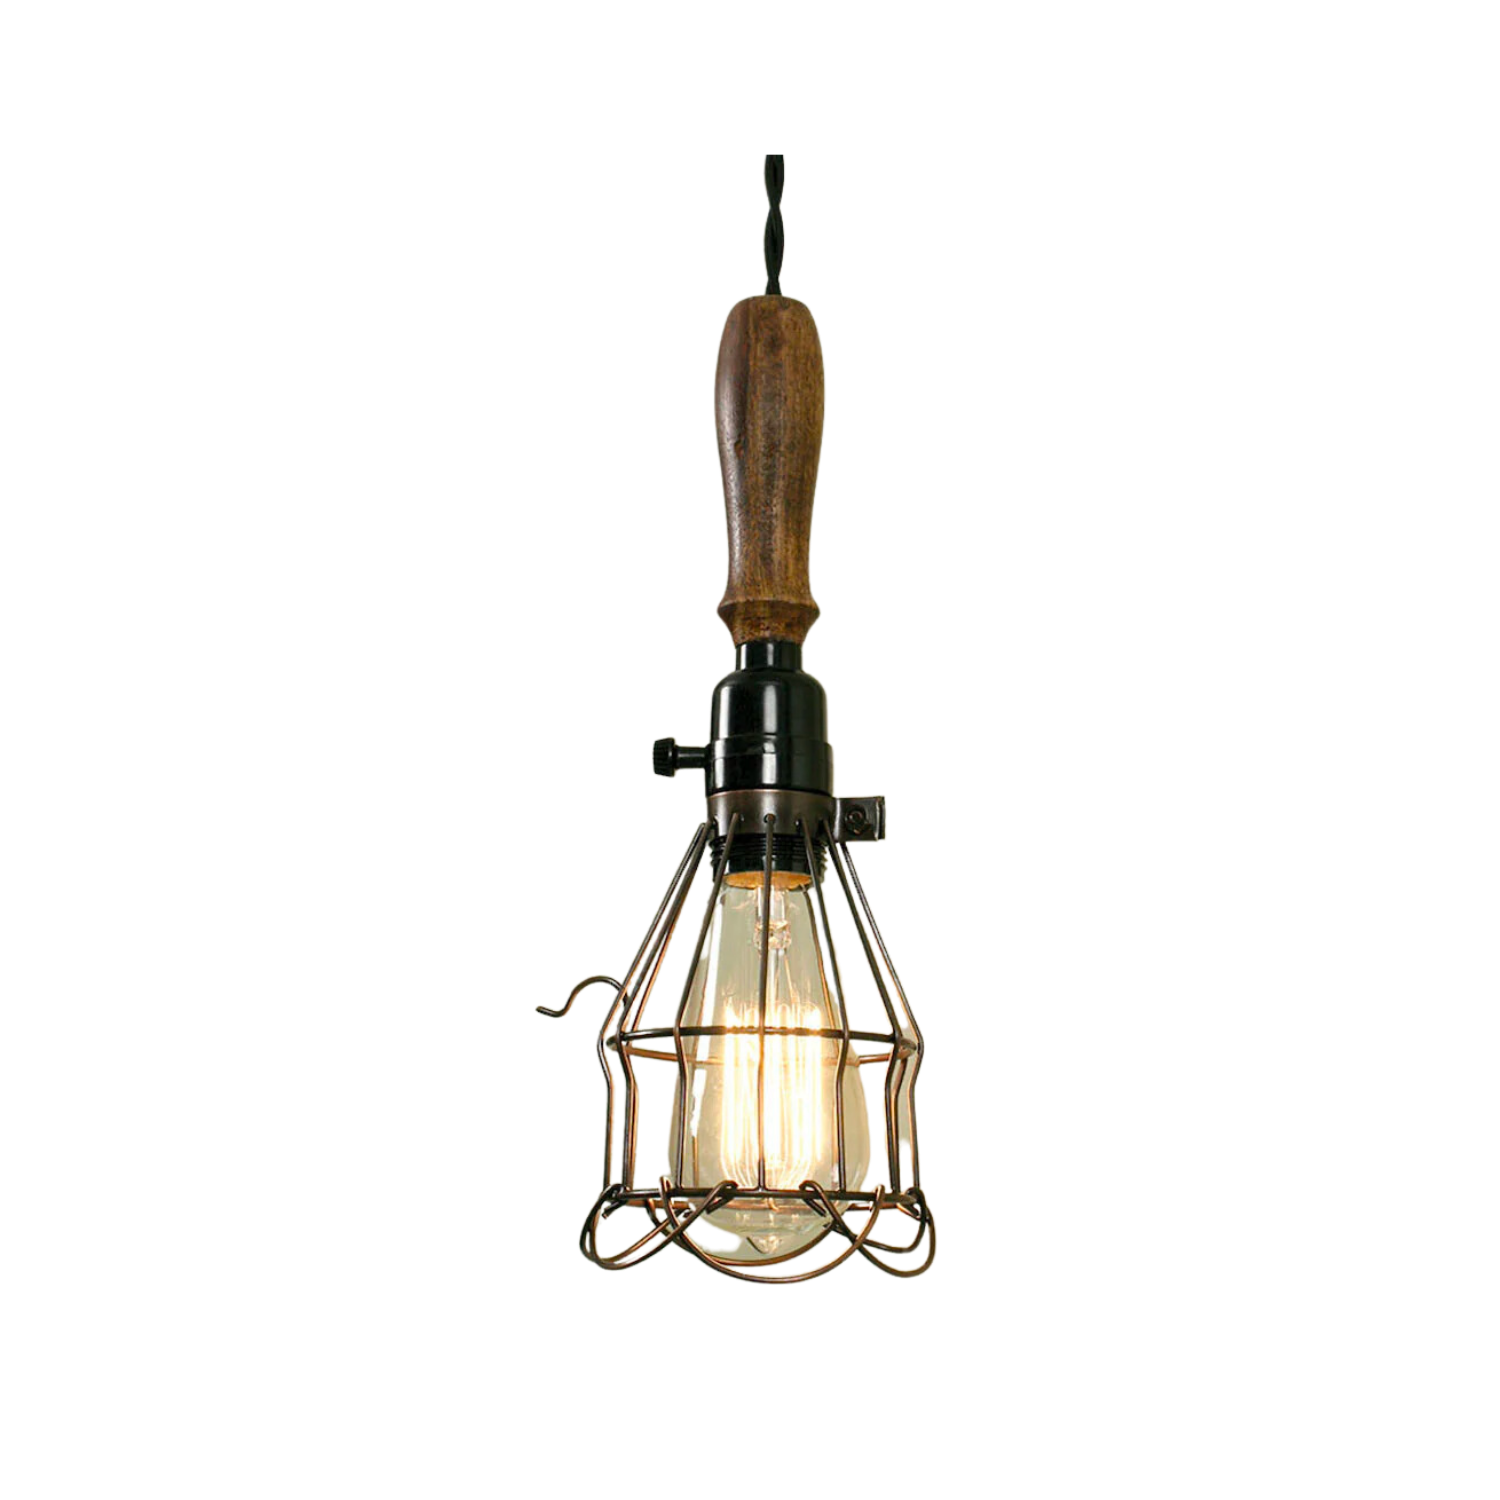 Industrial pendant light - cage